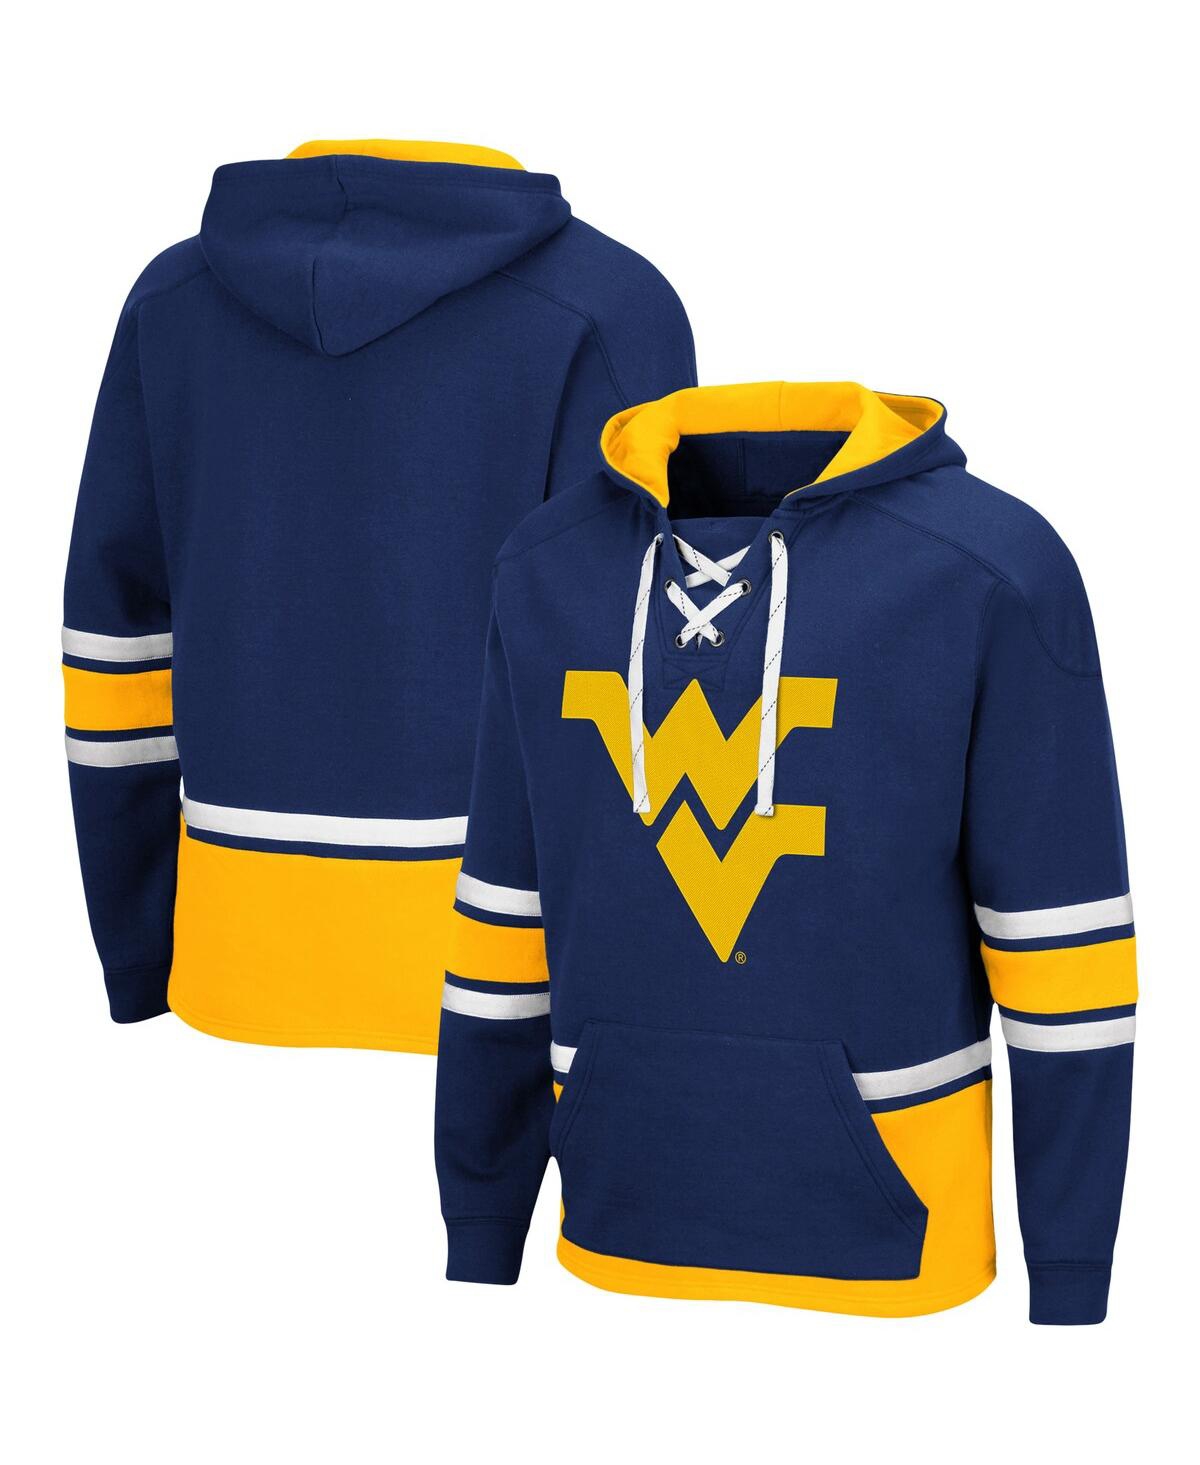 Shop Colosseum Men's Navy West Virginia Mountaineers Lace Up 3.0 Pullover Hoodie